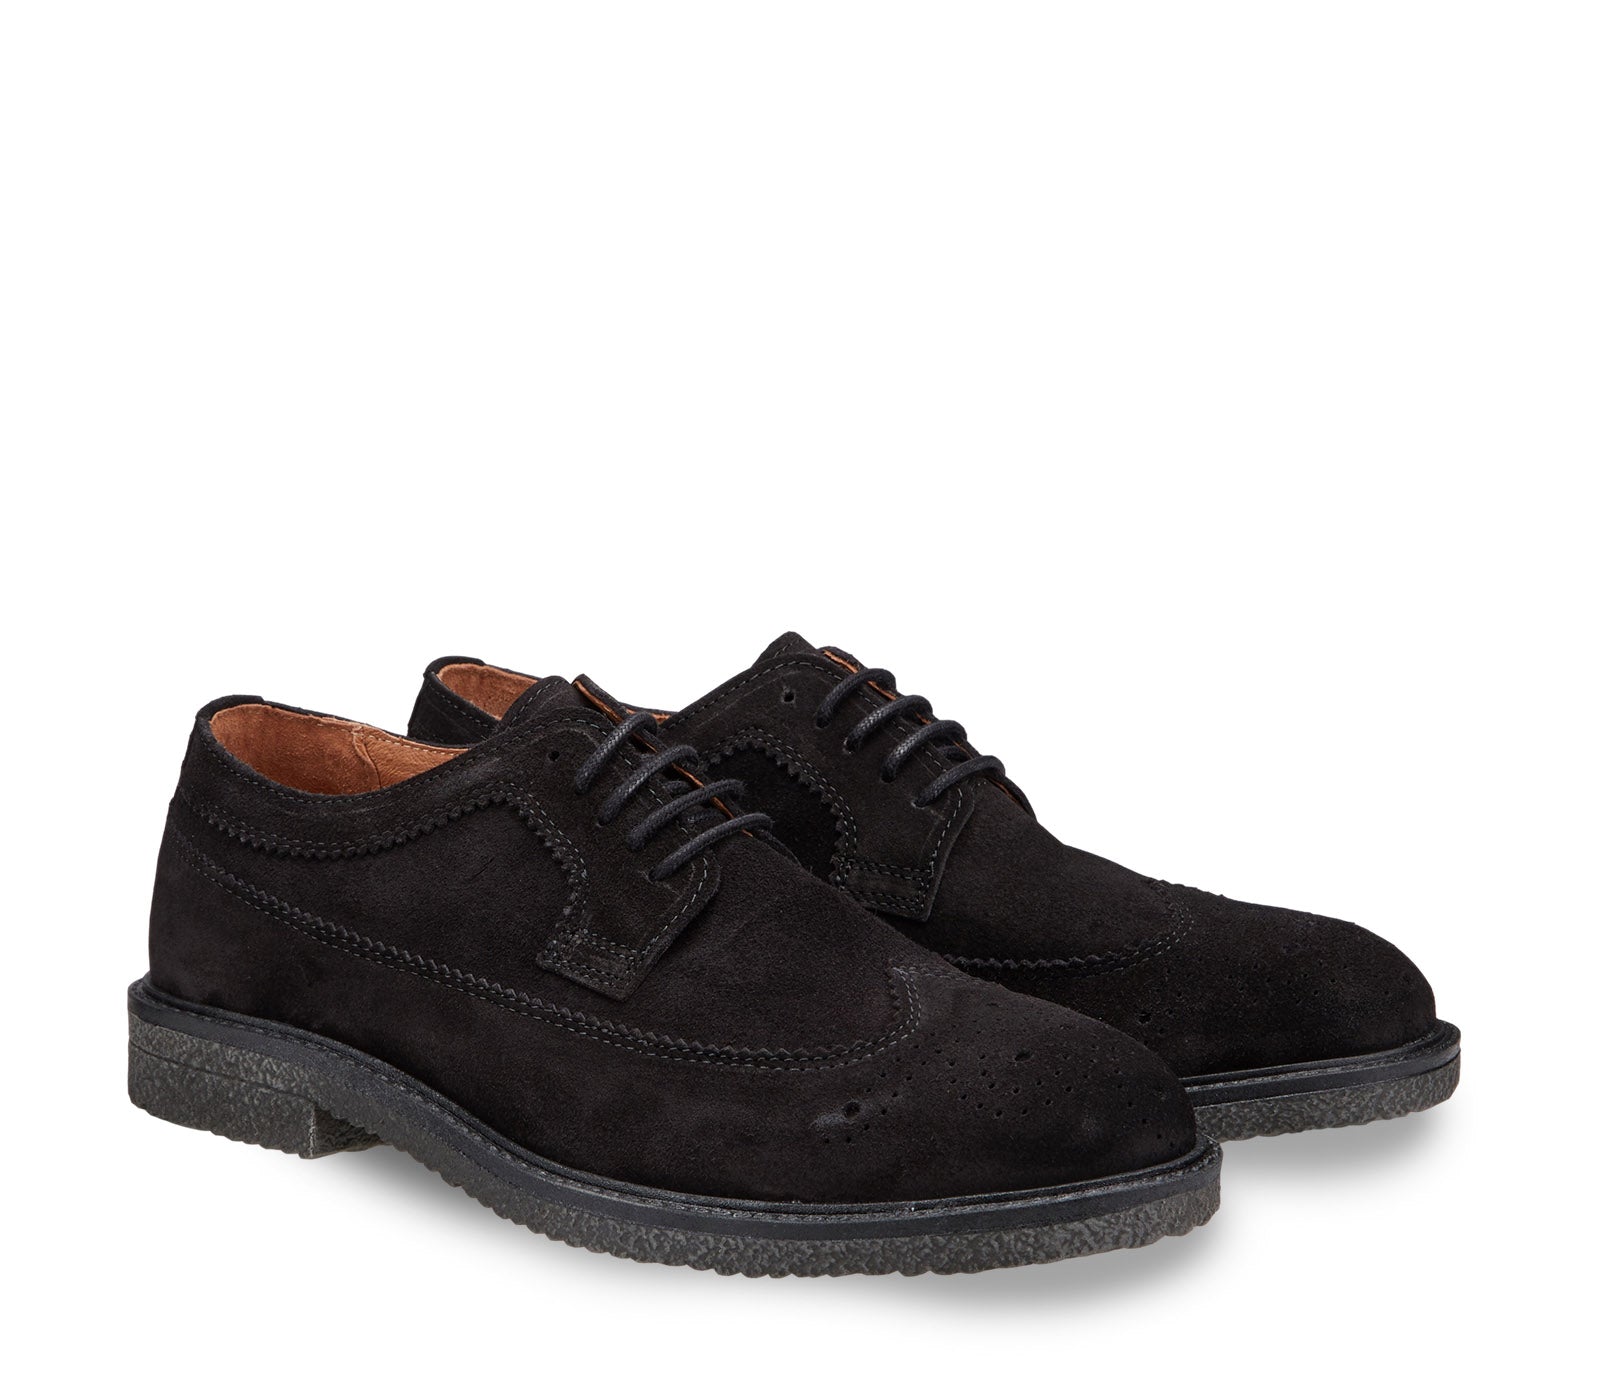 Men's Suede Leather Laced Shoe